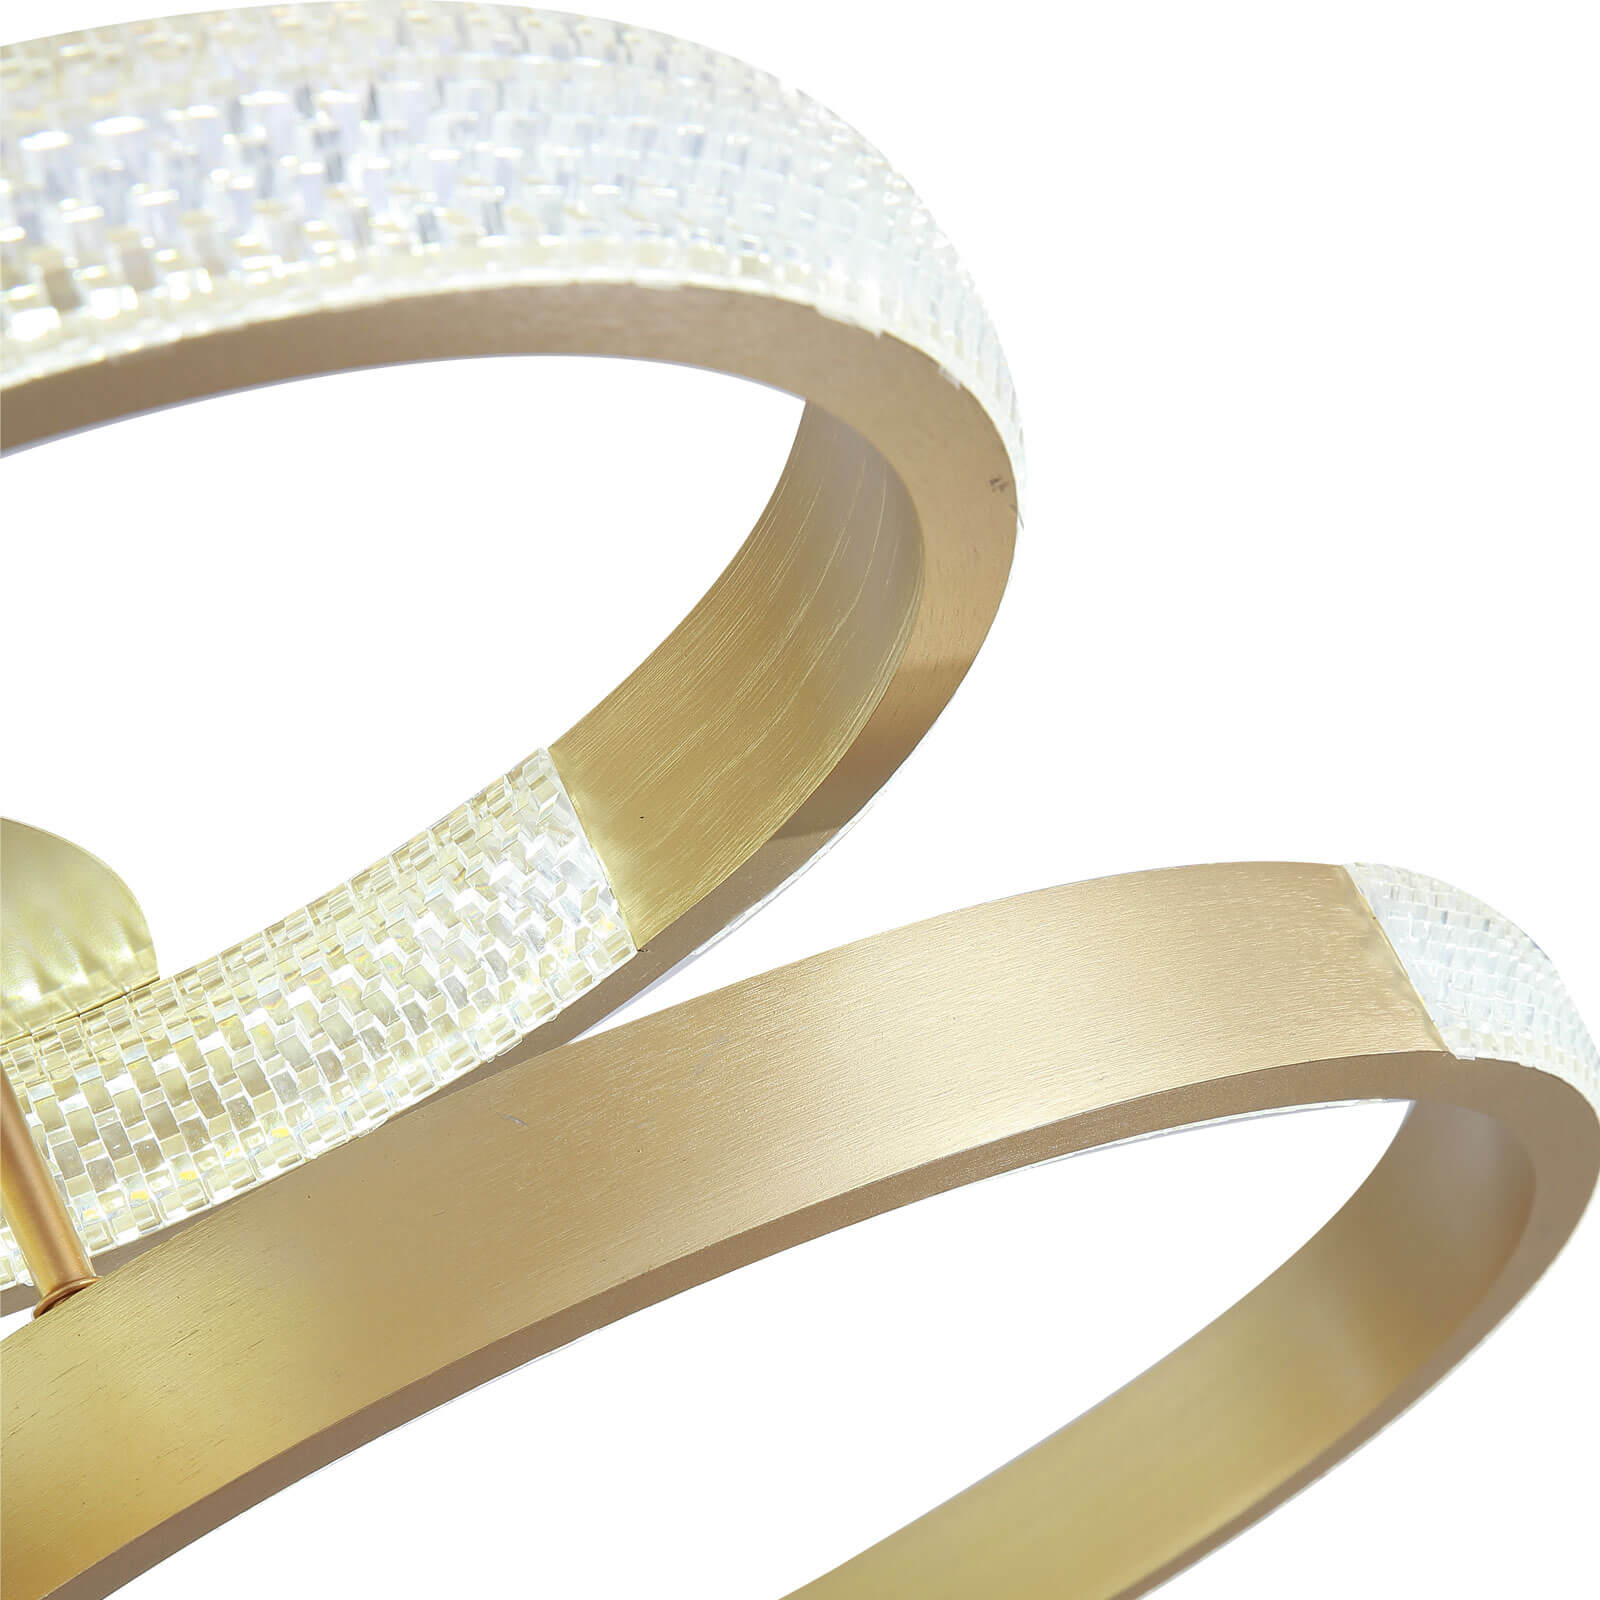 Modern-Gold-Round-Crystal-Multi-Ring-Ceiling-Light